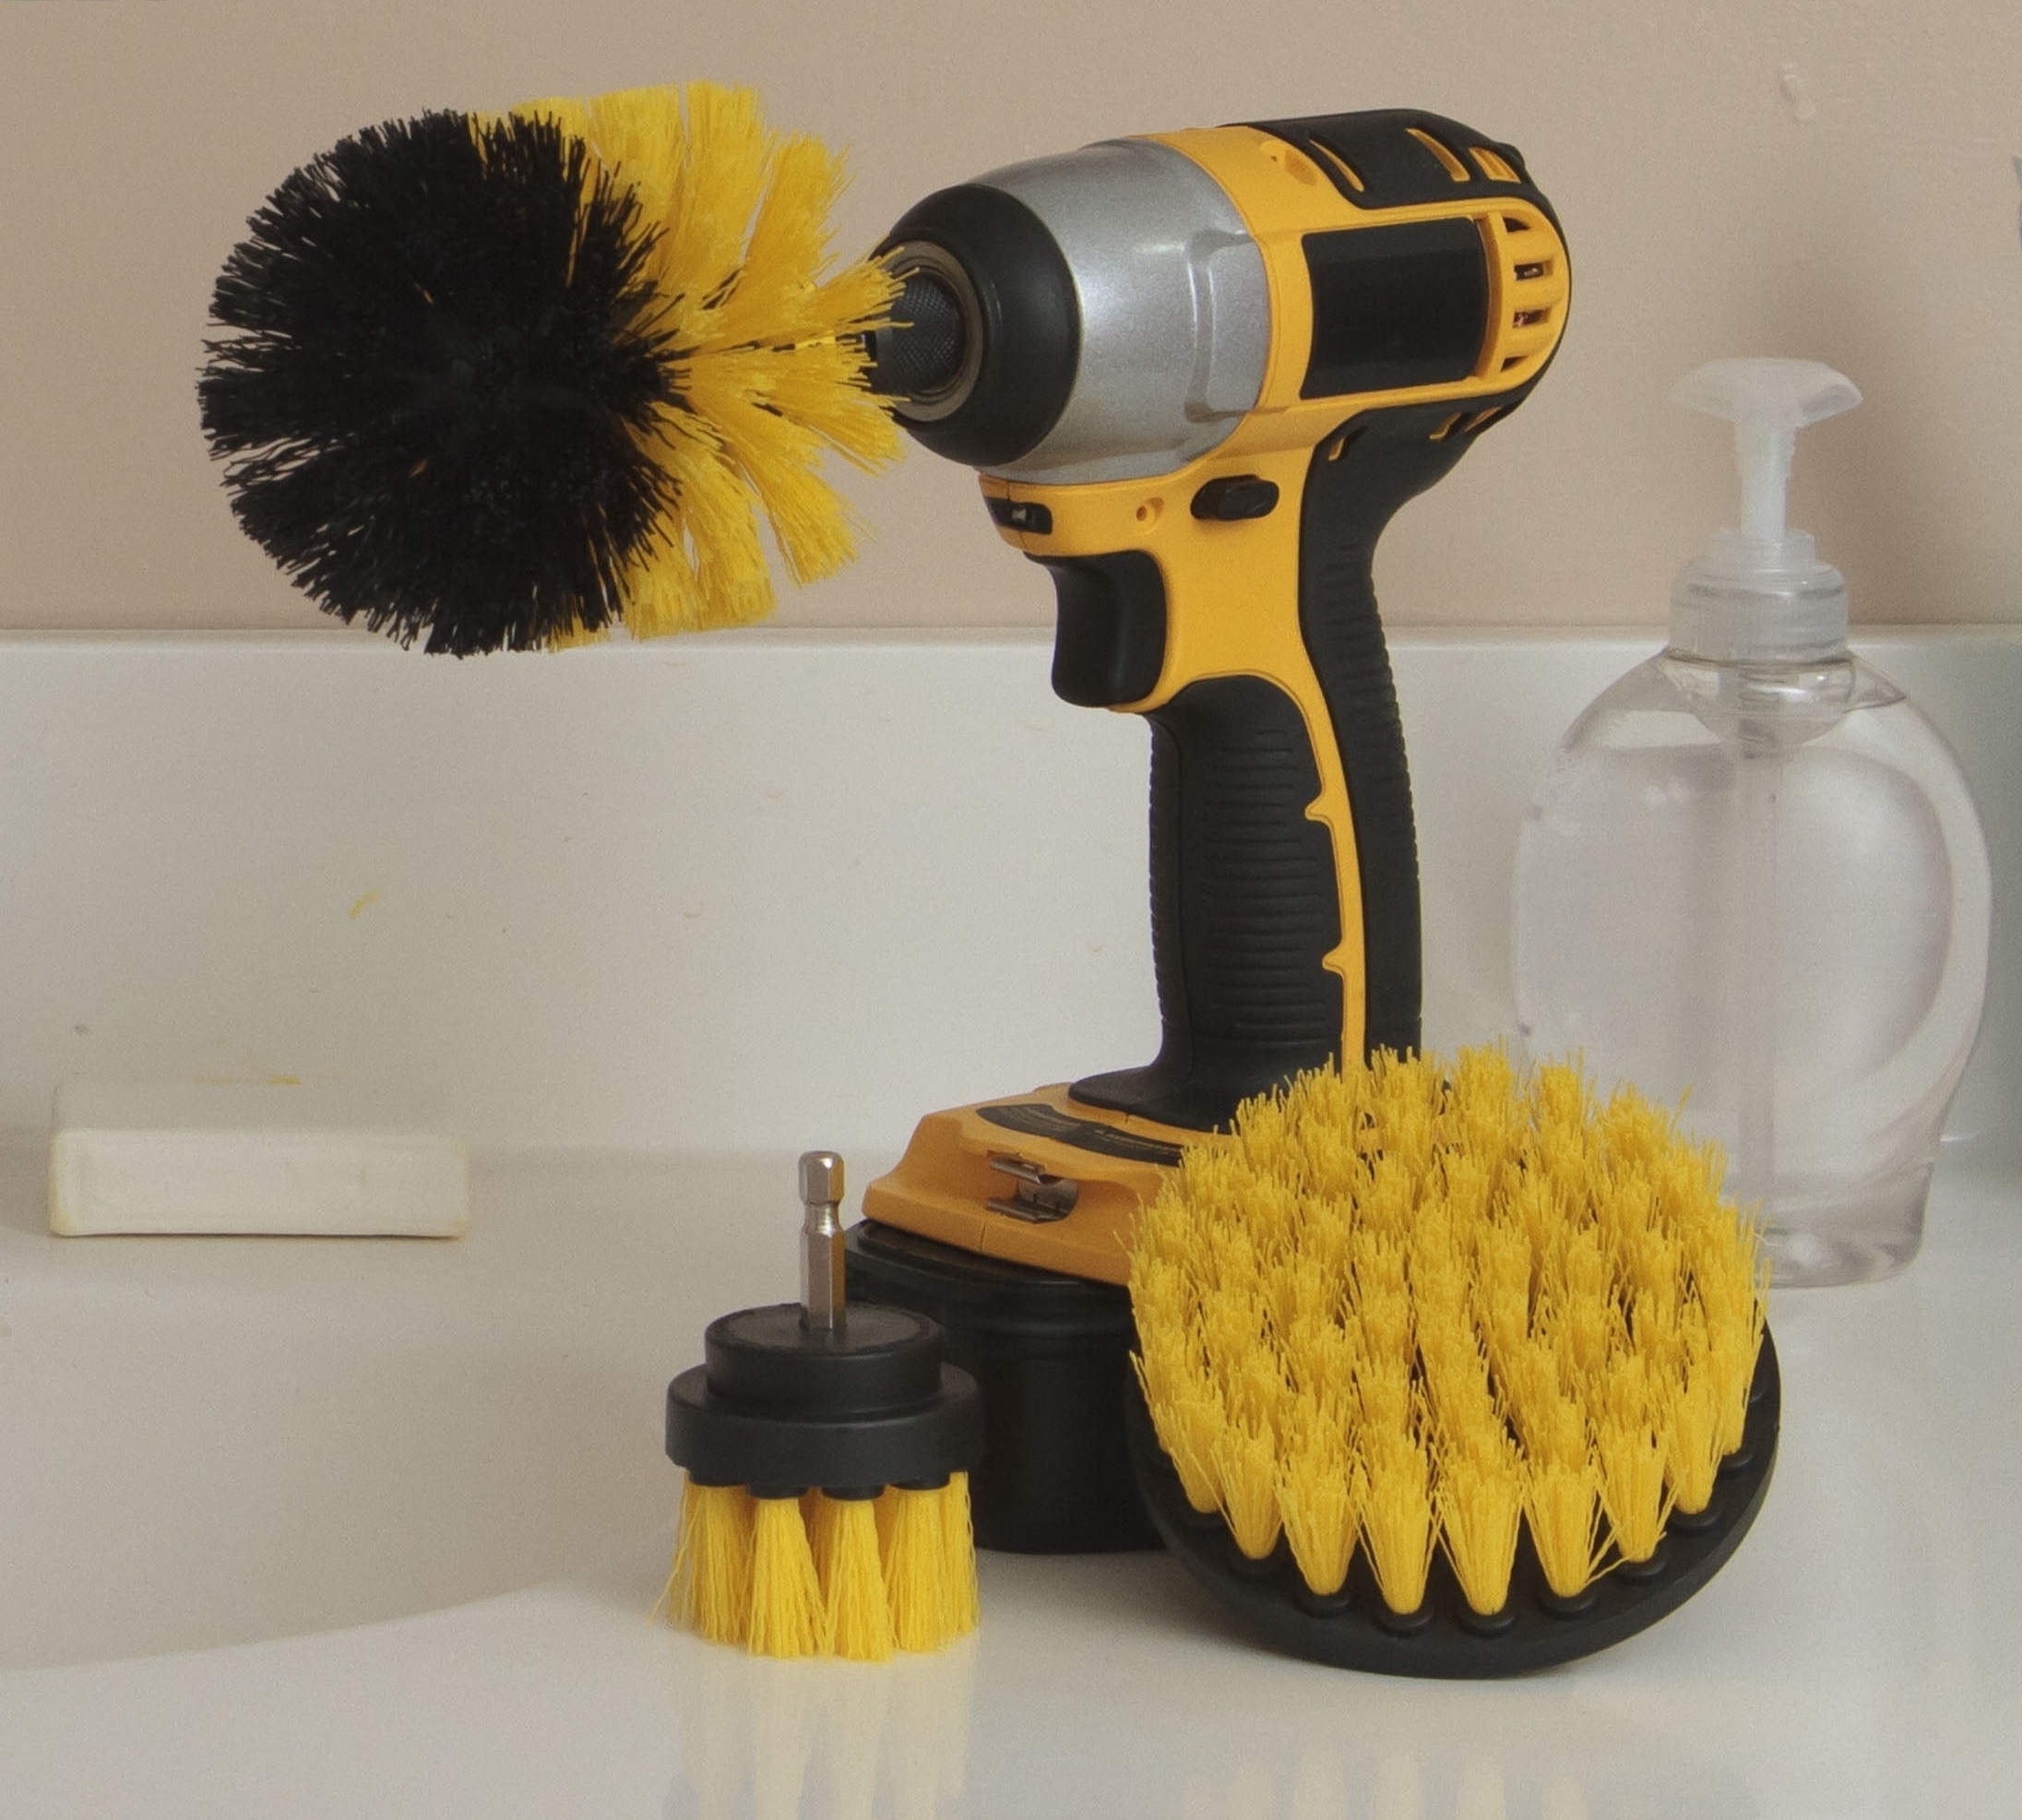 Drill with attached scrub brush next to additional brush heads and a soap dispenser